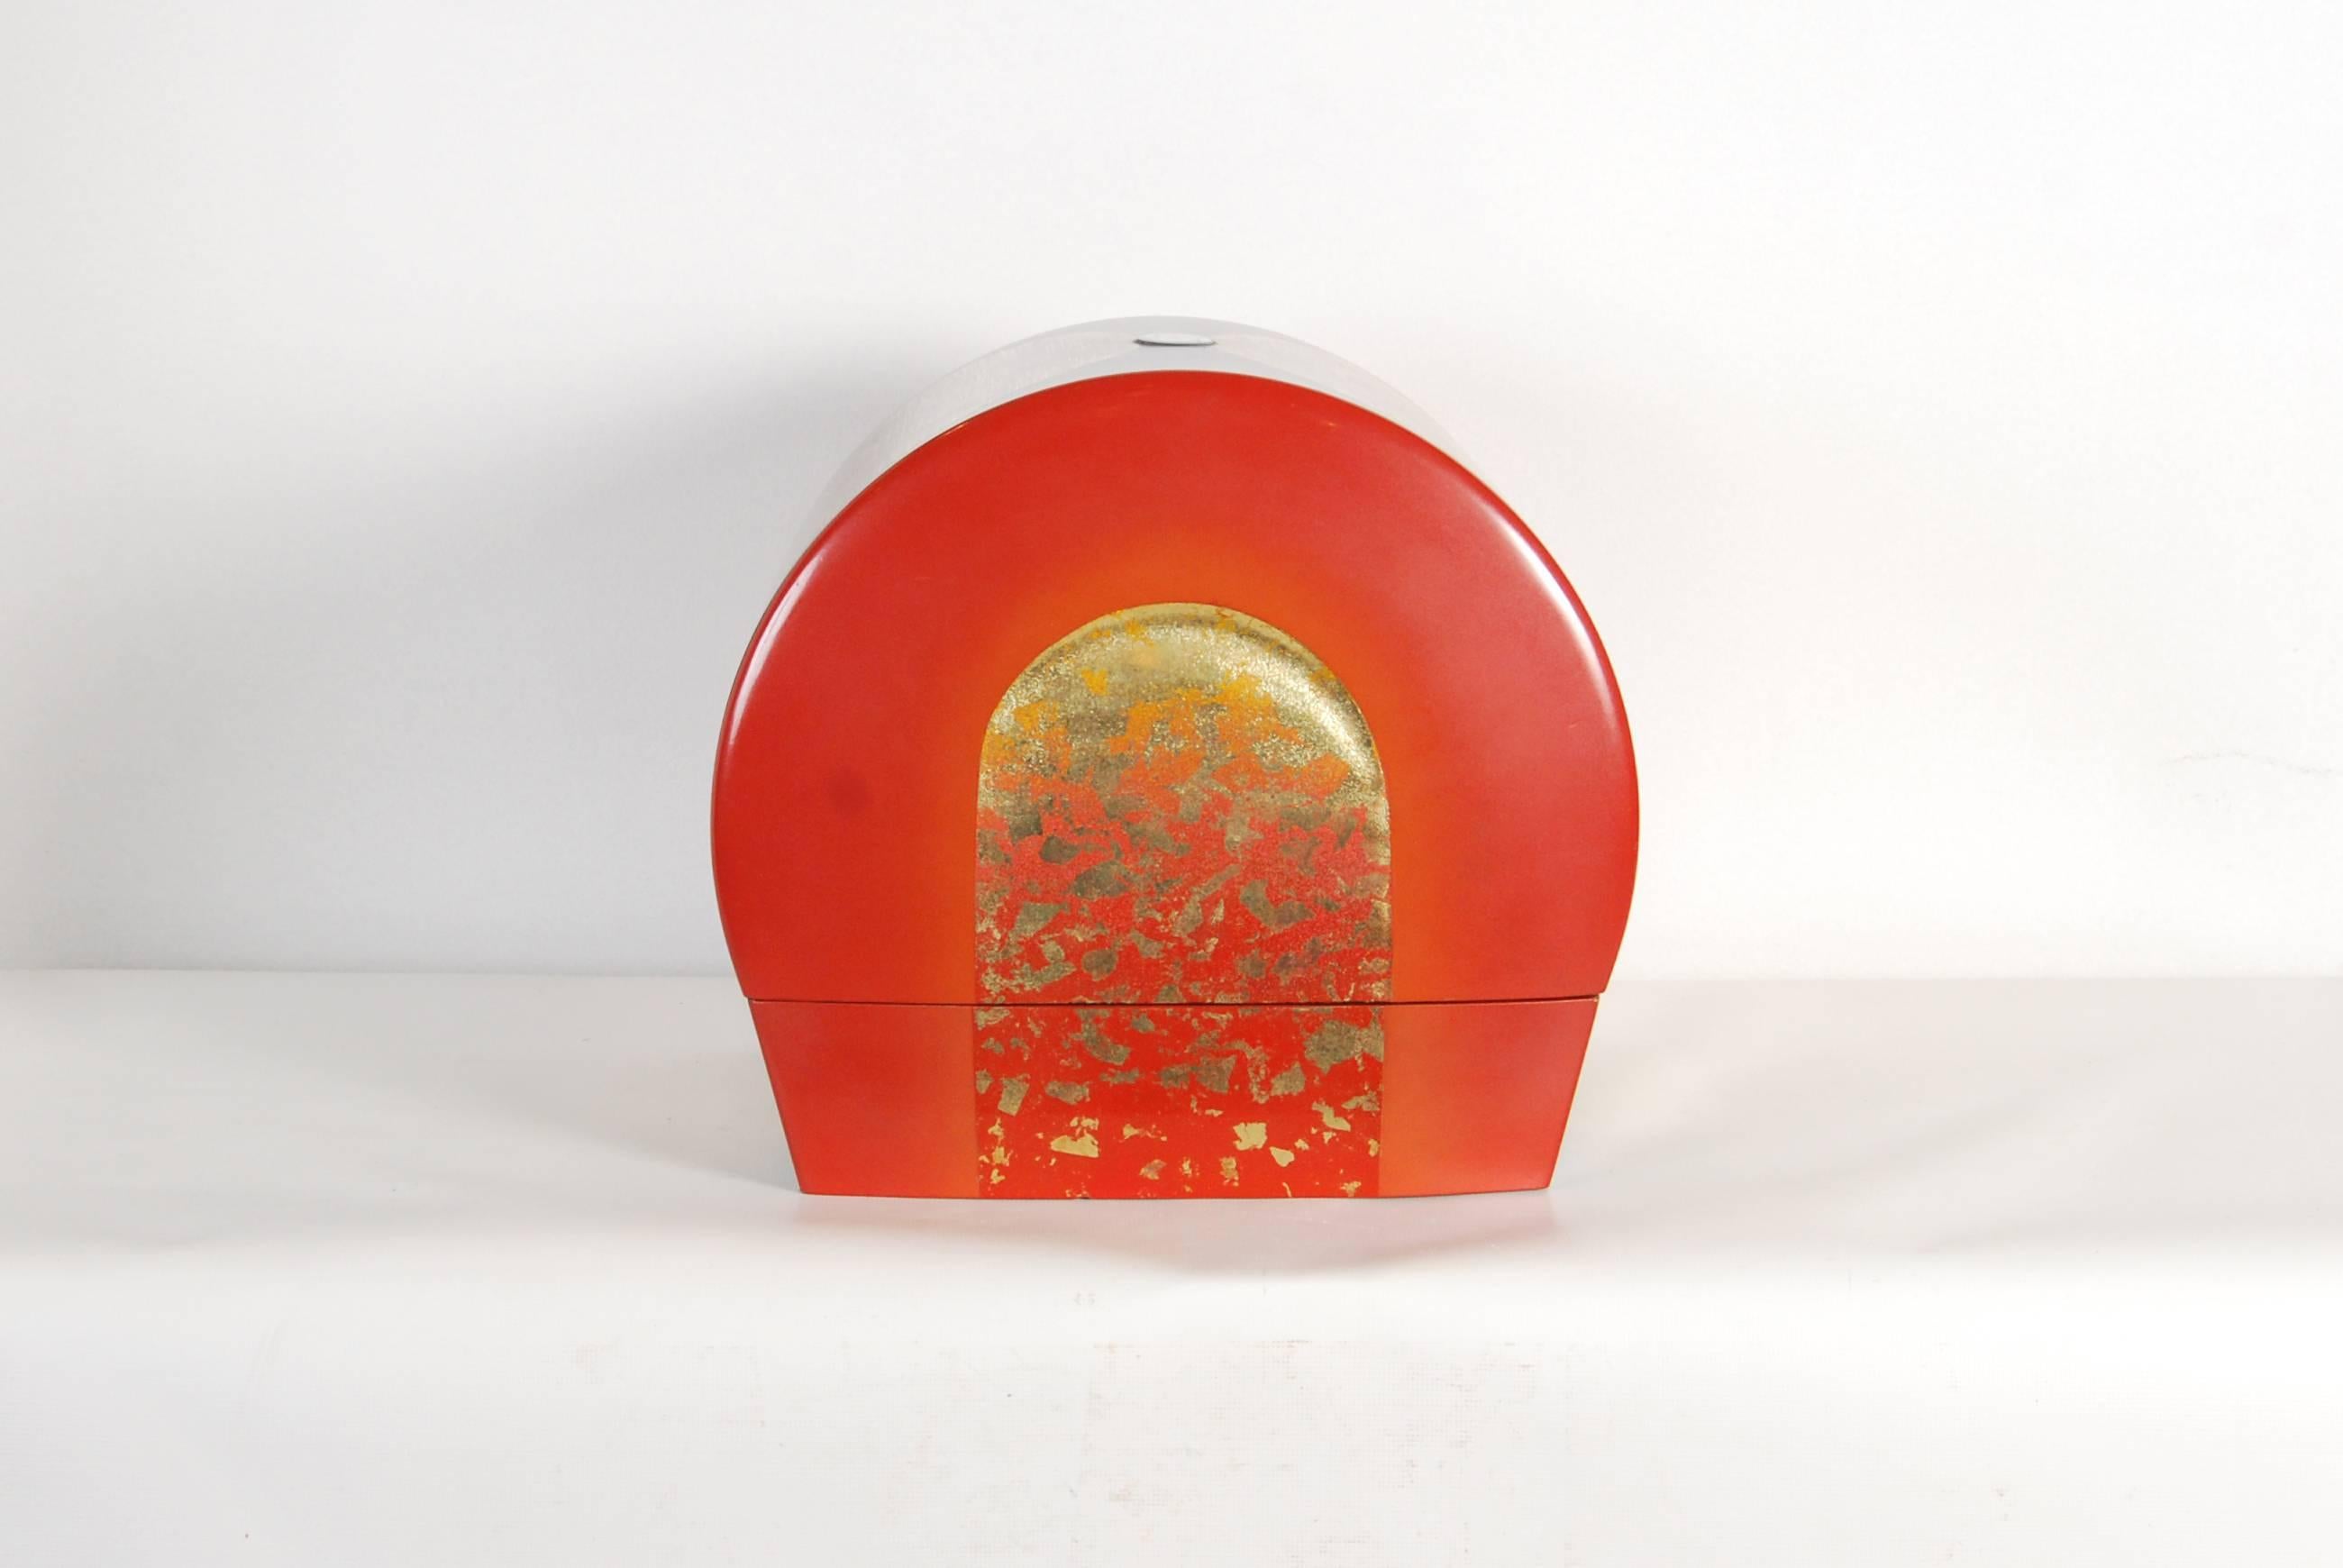 Contemporary Japanese red, blue and gold lacquer box of unusual arching form and heavy, carved construction by the known lacquer artist Yoshifumi Takeuchi.

Decorated on its lid with an inlaid mother-of-pearl finial and overall vibrantly coloured